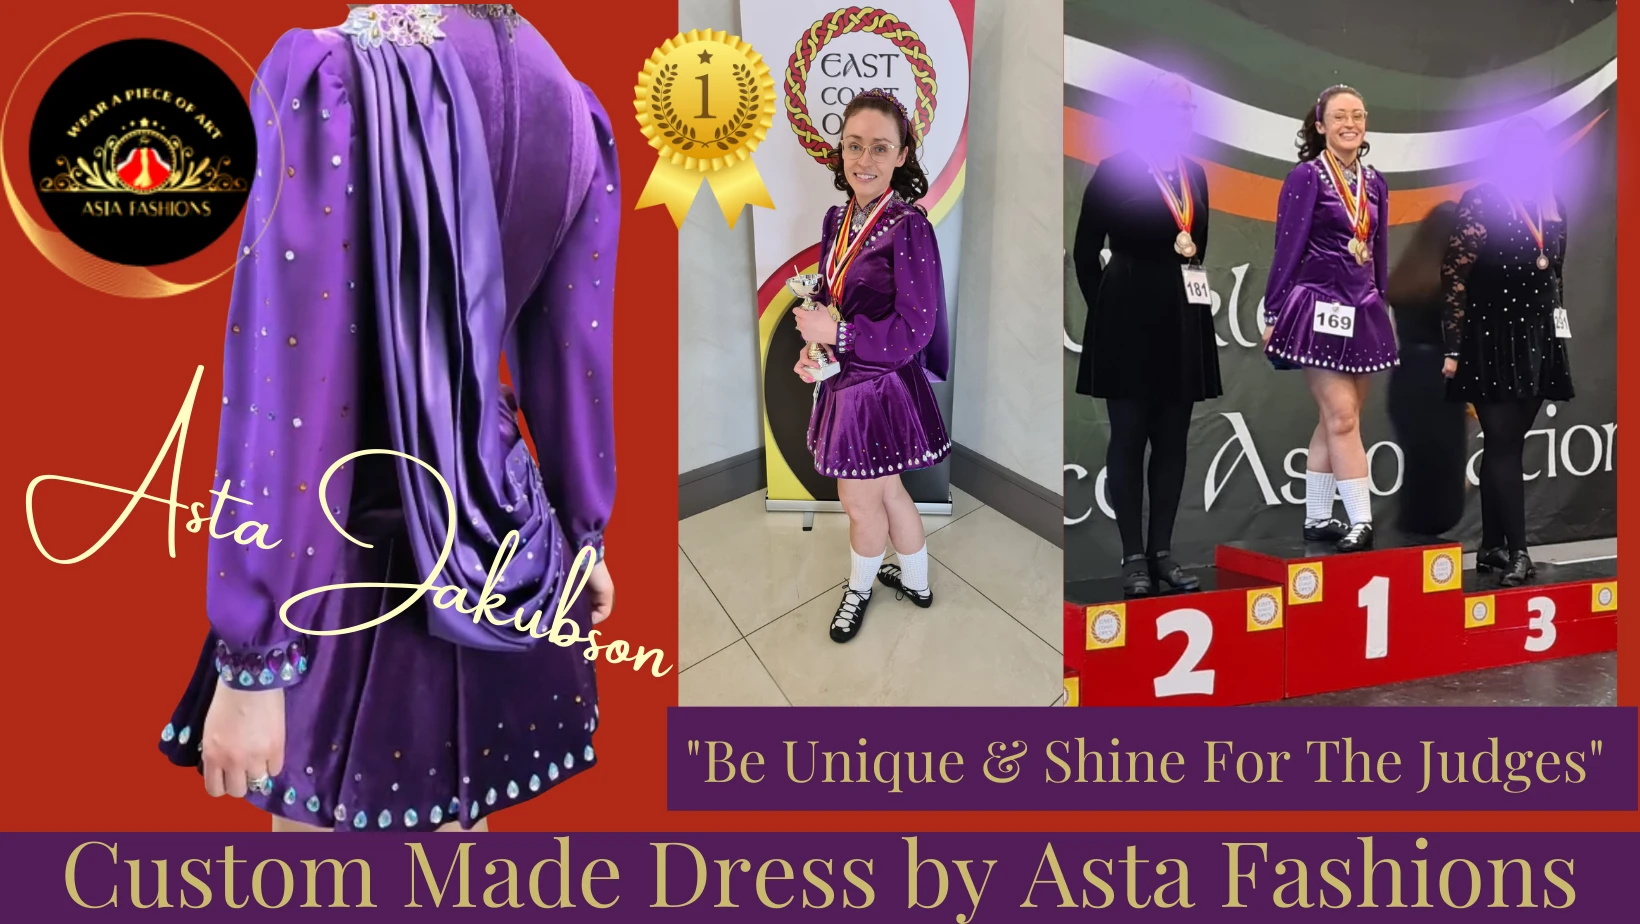 "Shine for the Judges wearing a Custom Made Asta Fashions Dress"